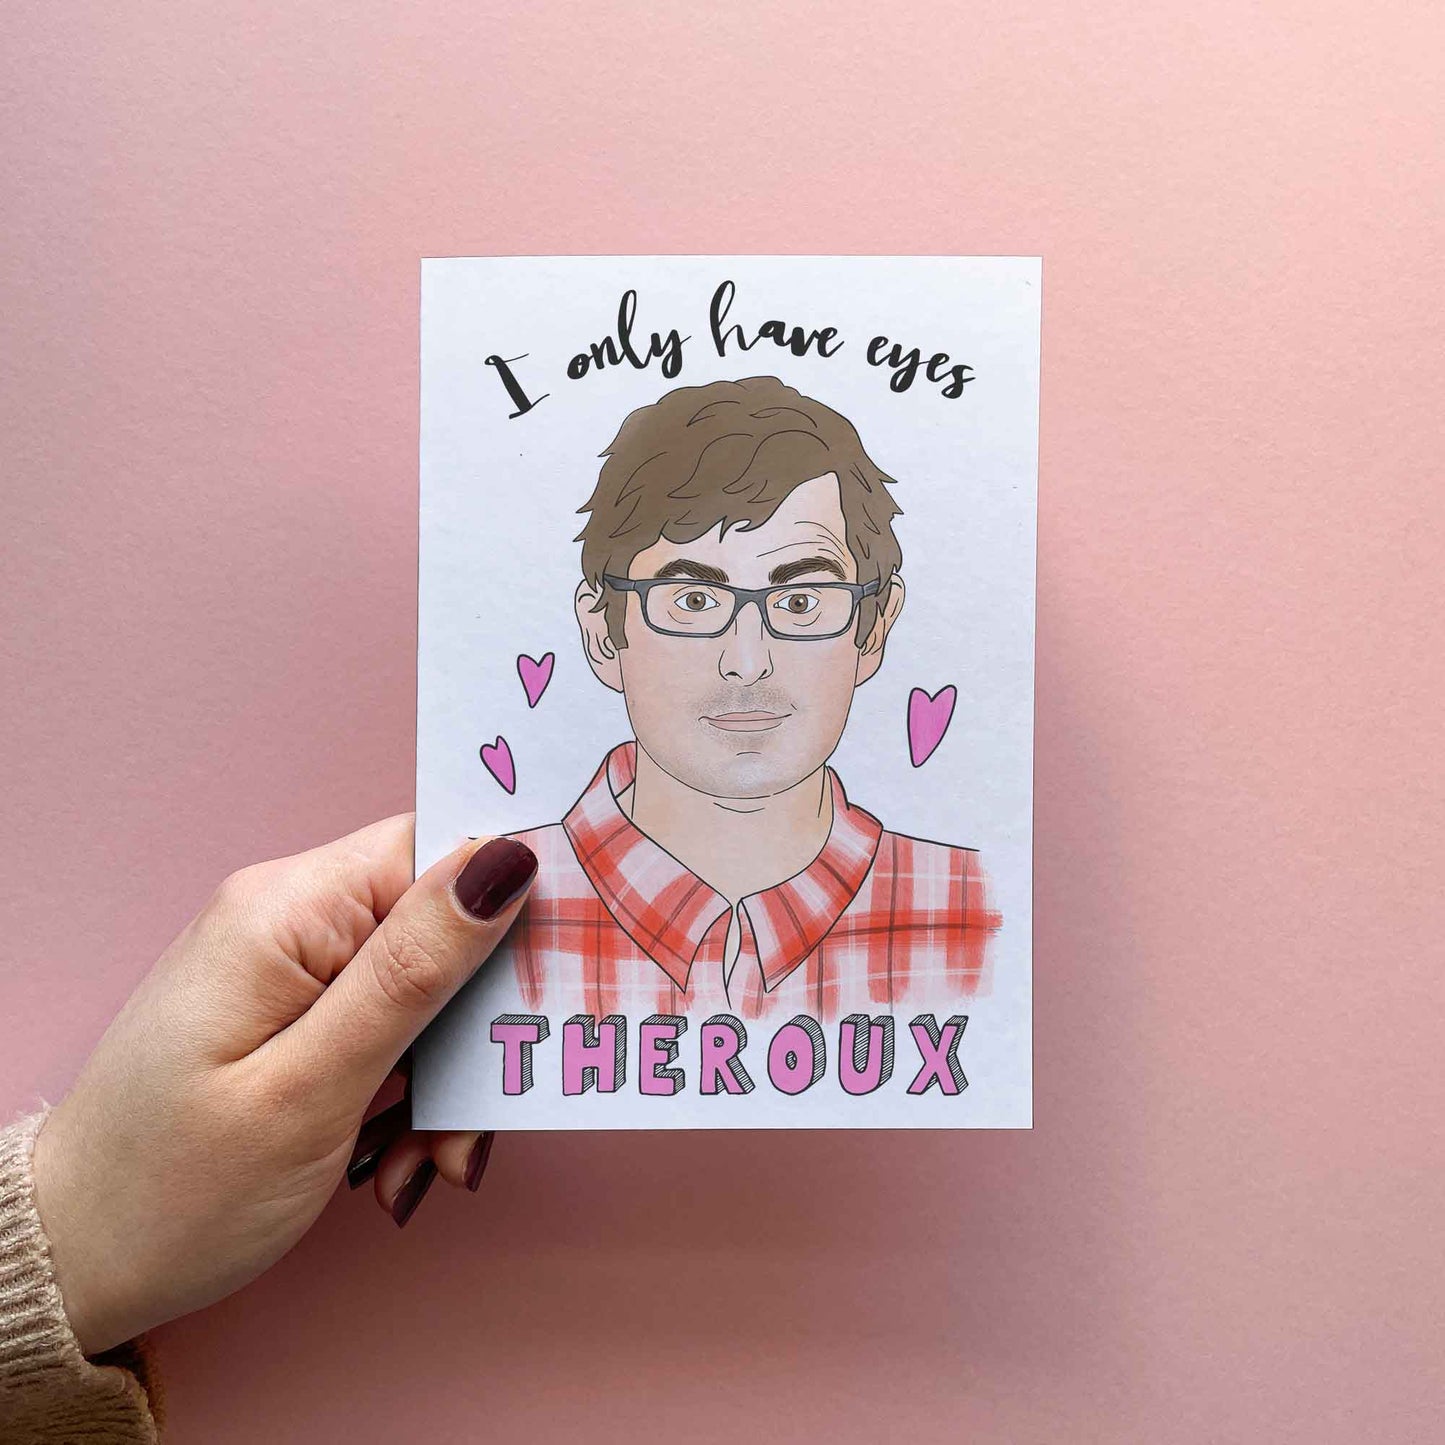 I Only Have Eyes Theroux - Funny Valentine's Day Card